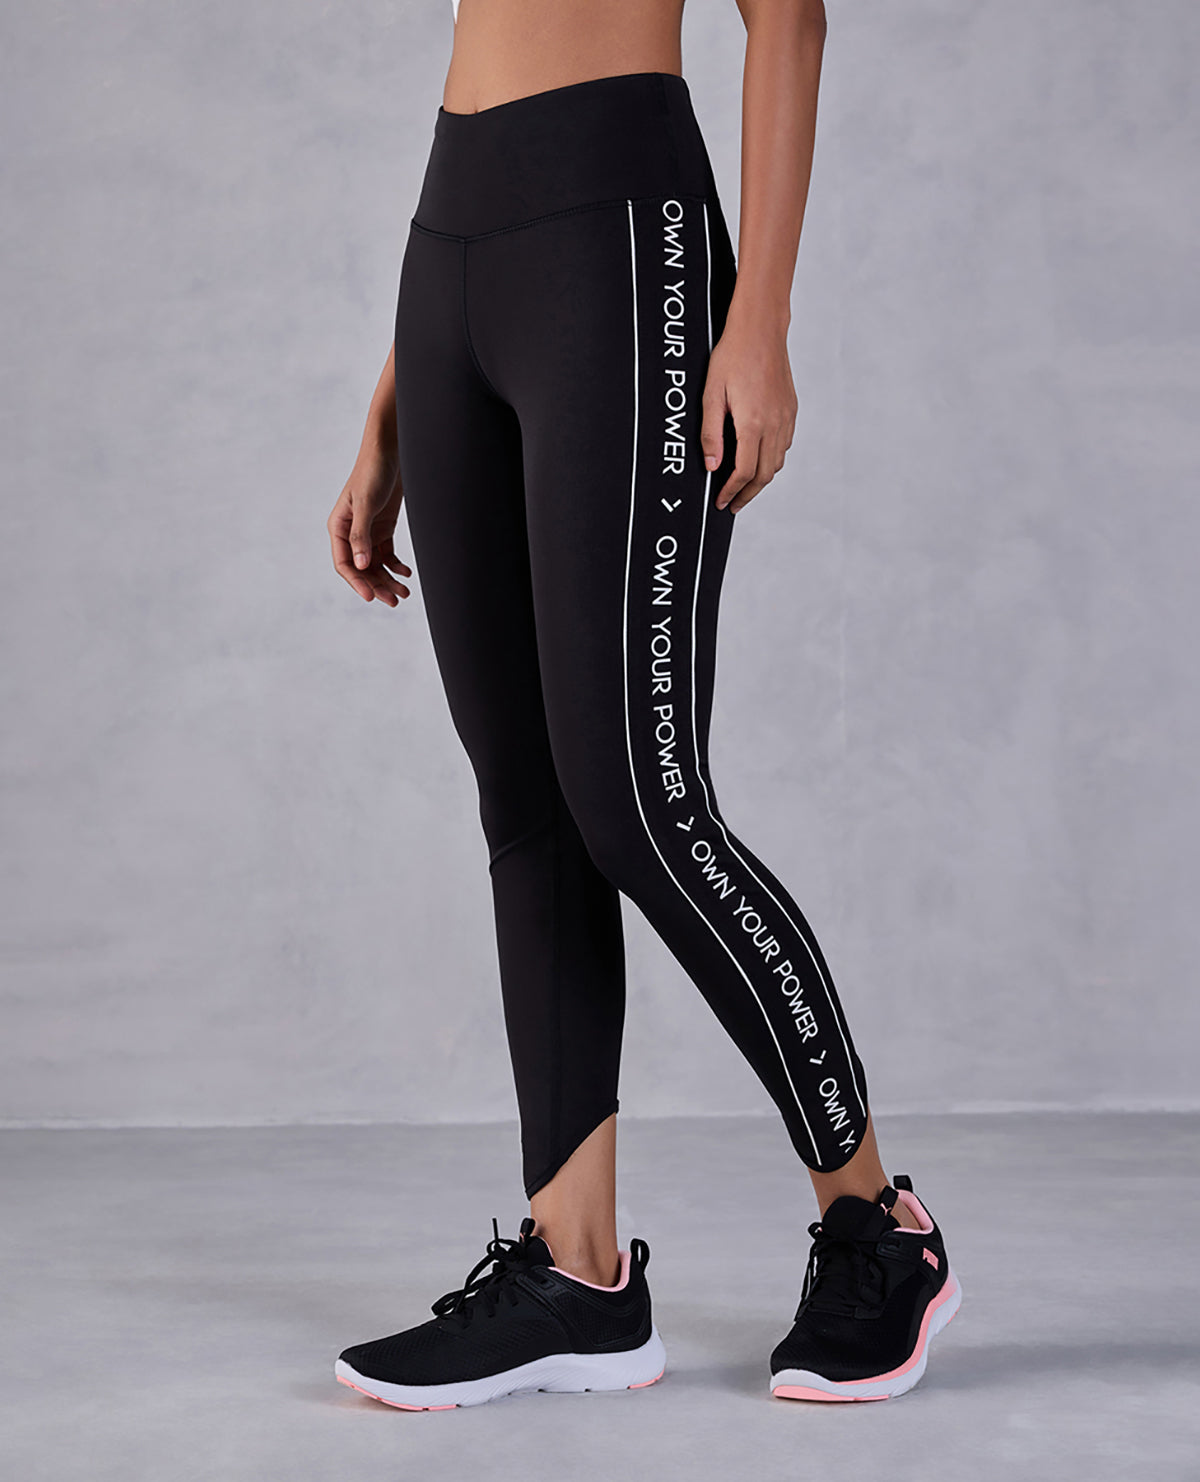 Criss-Cross Flare Pants in Second SKN – Kica Active